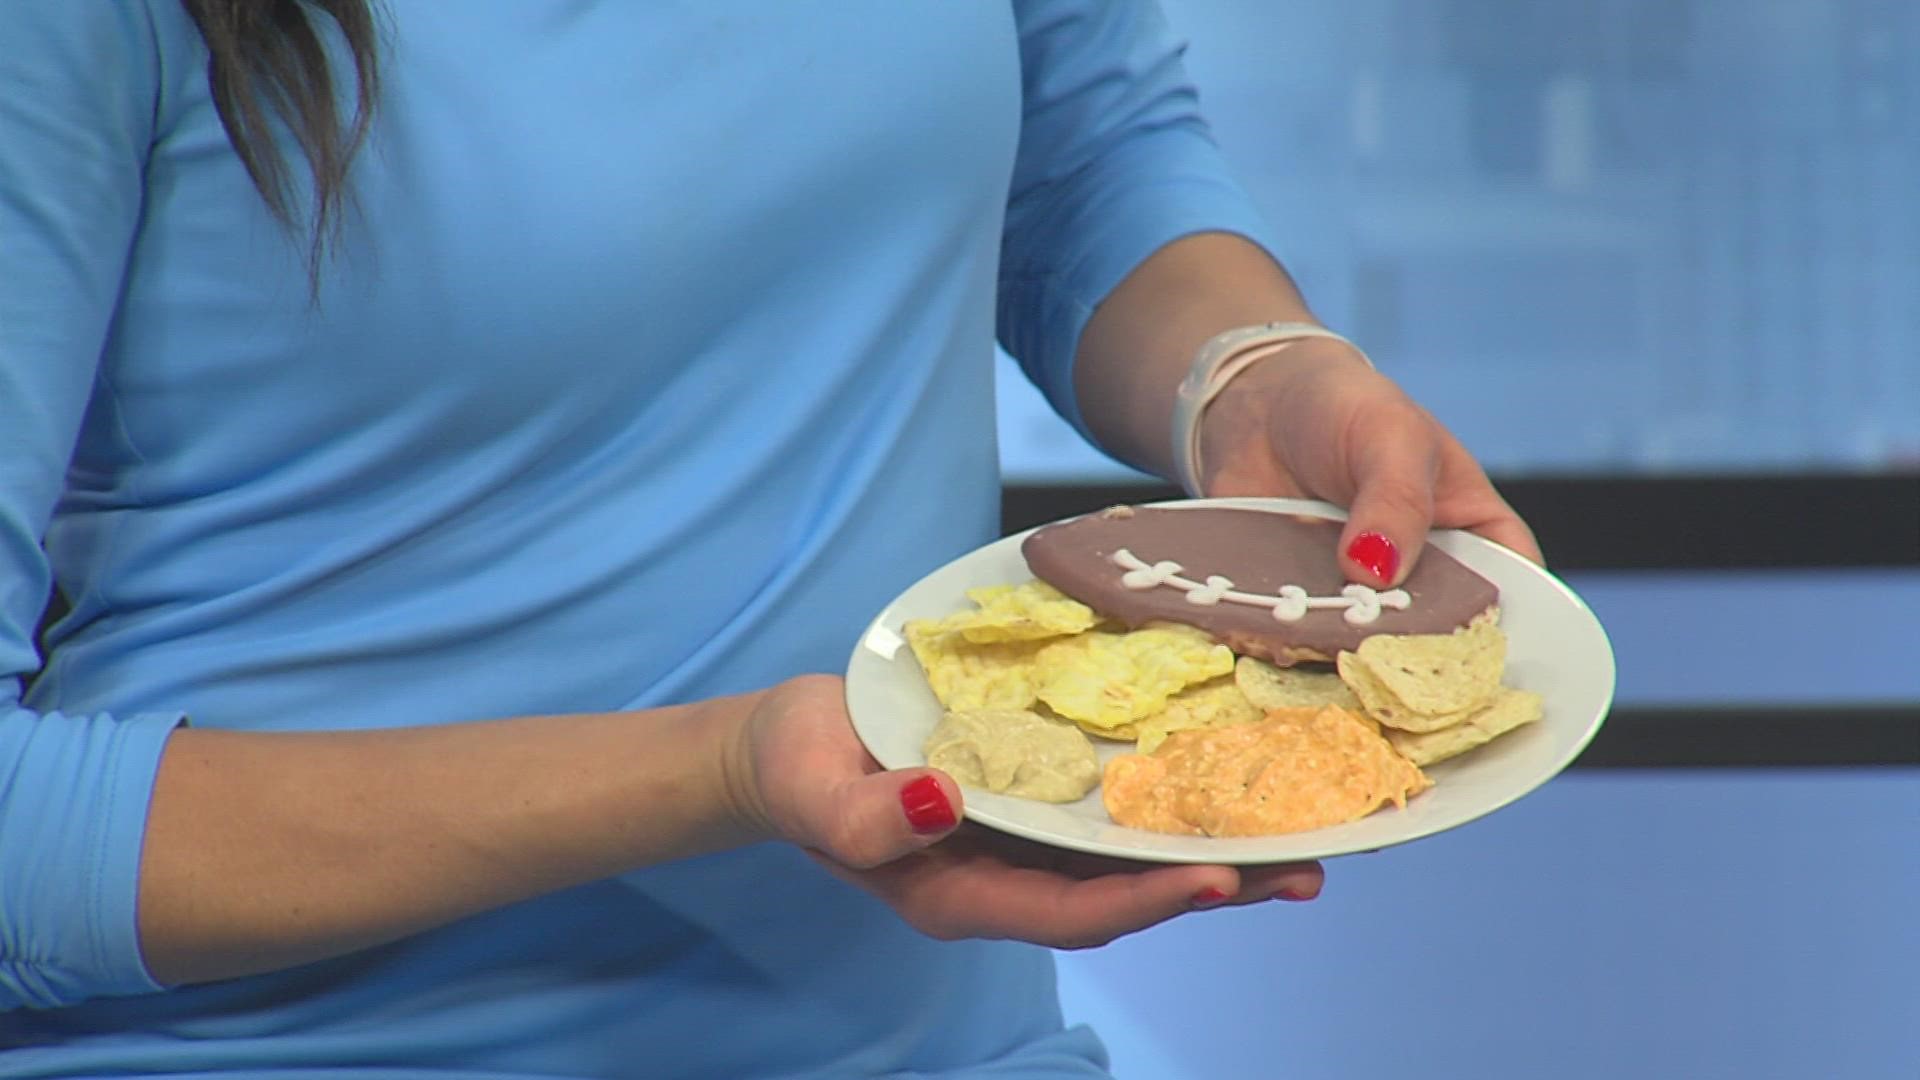 From buffalo chicken dip to football-shaped cookies, the Good Morning Iowa team geared up for the Super Bowl on the show.